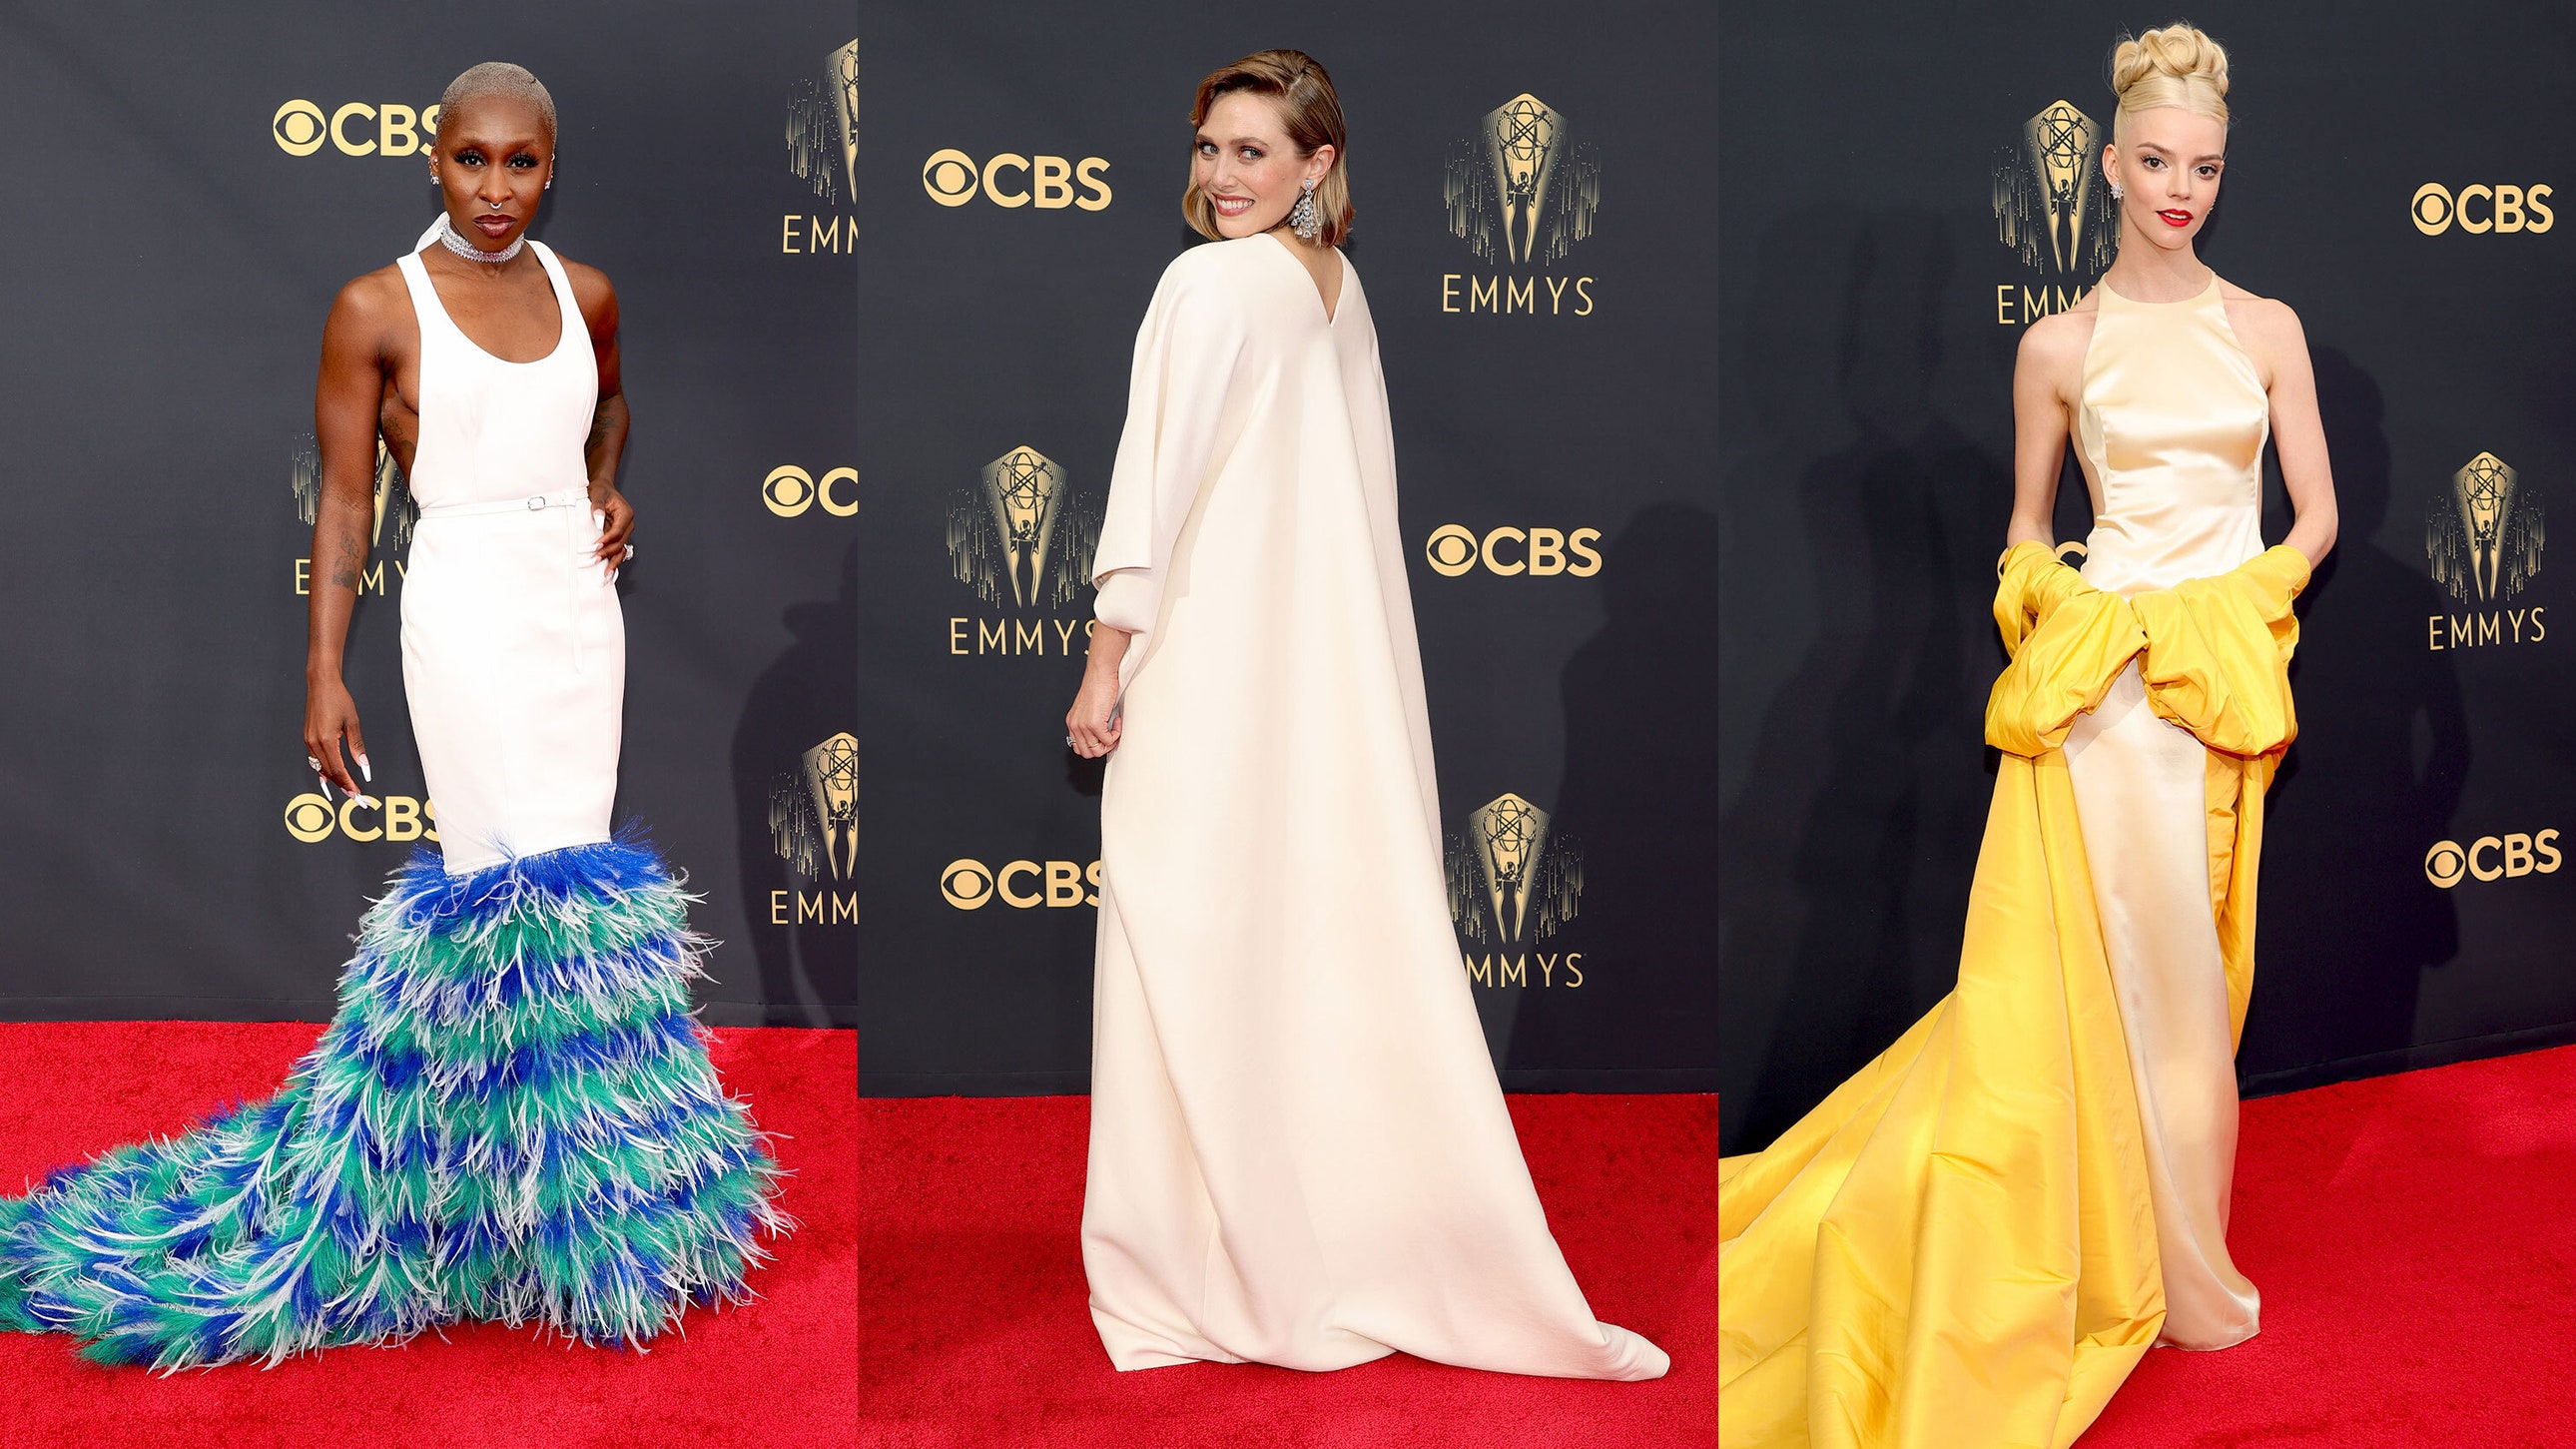 The Best Dressed Stars at the 2021 Primetime Emmy Awards